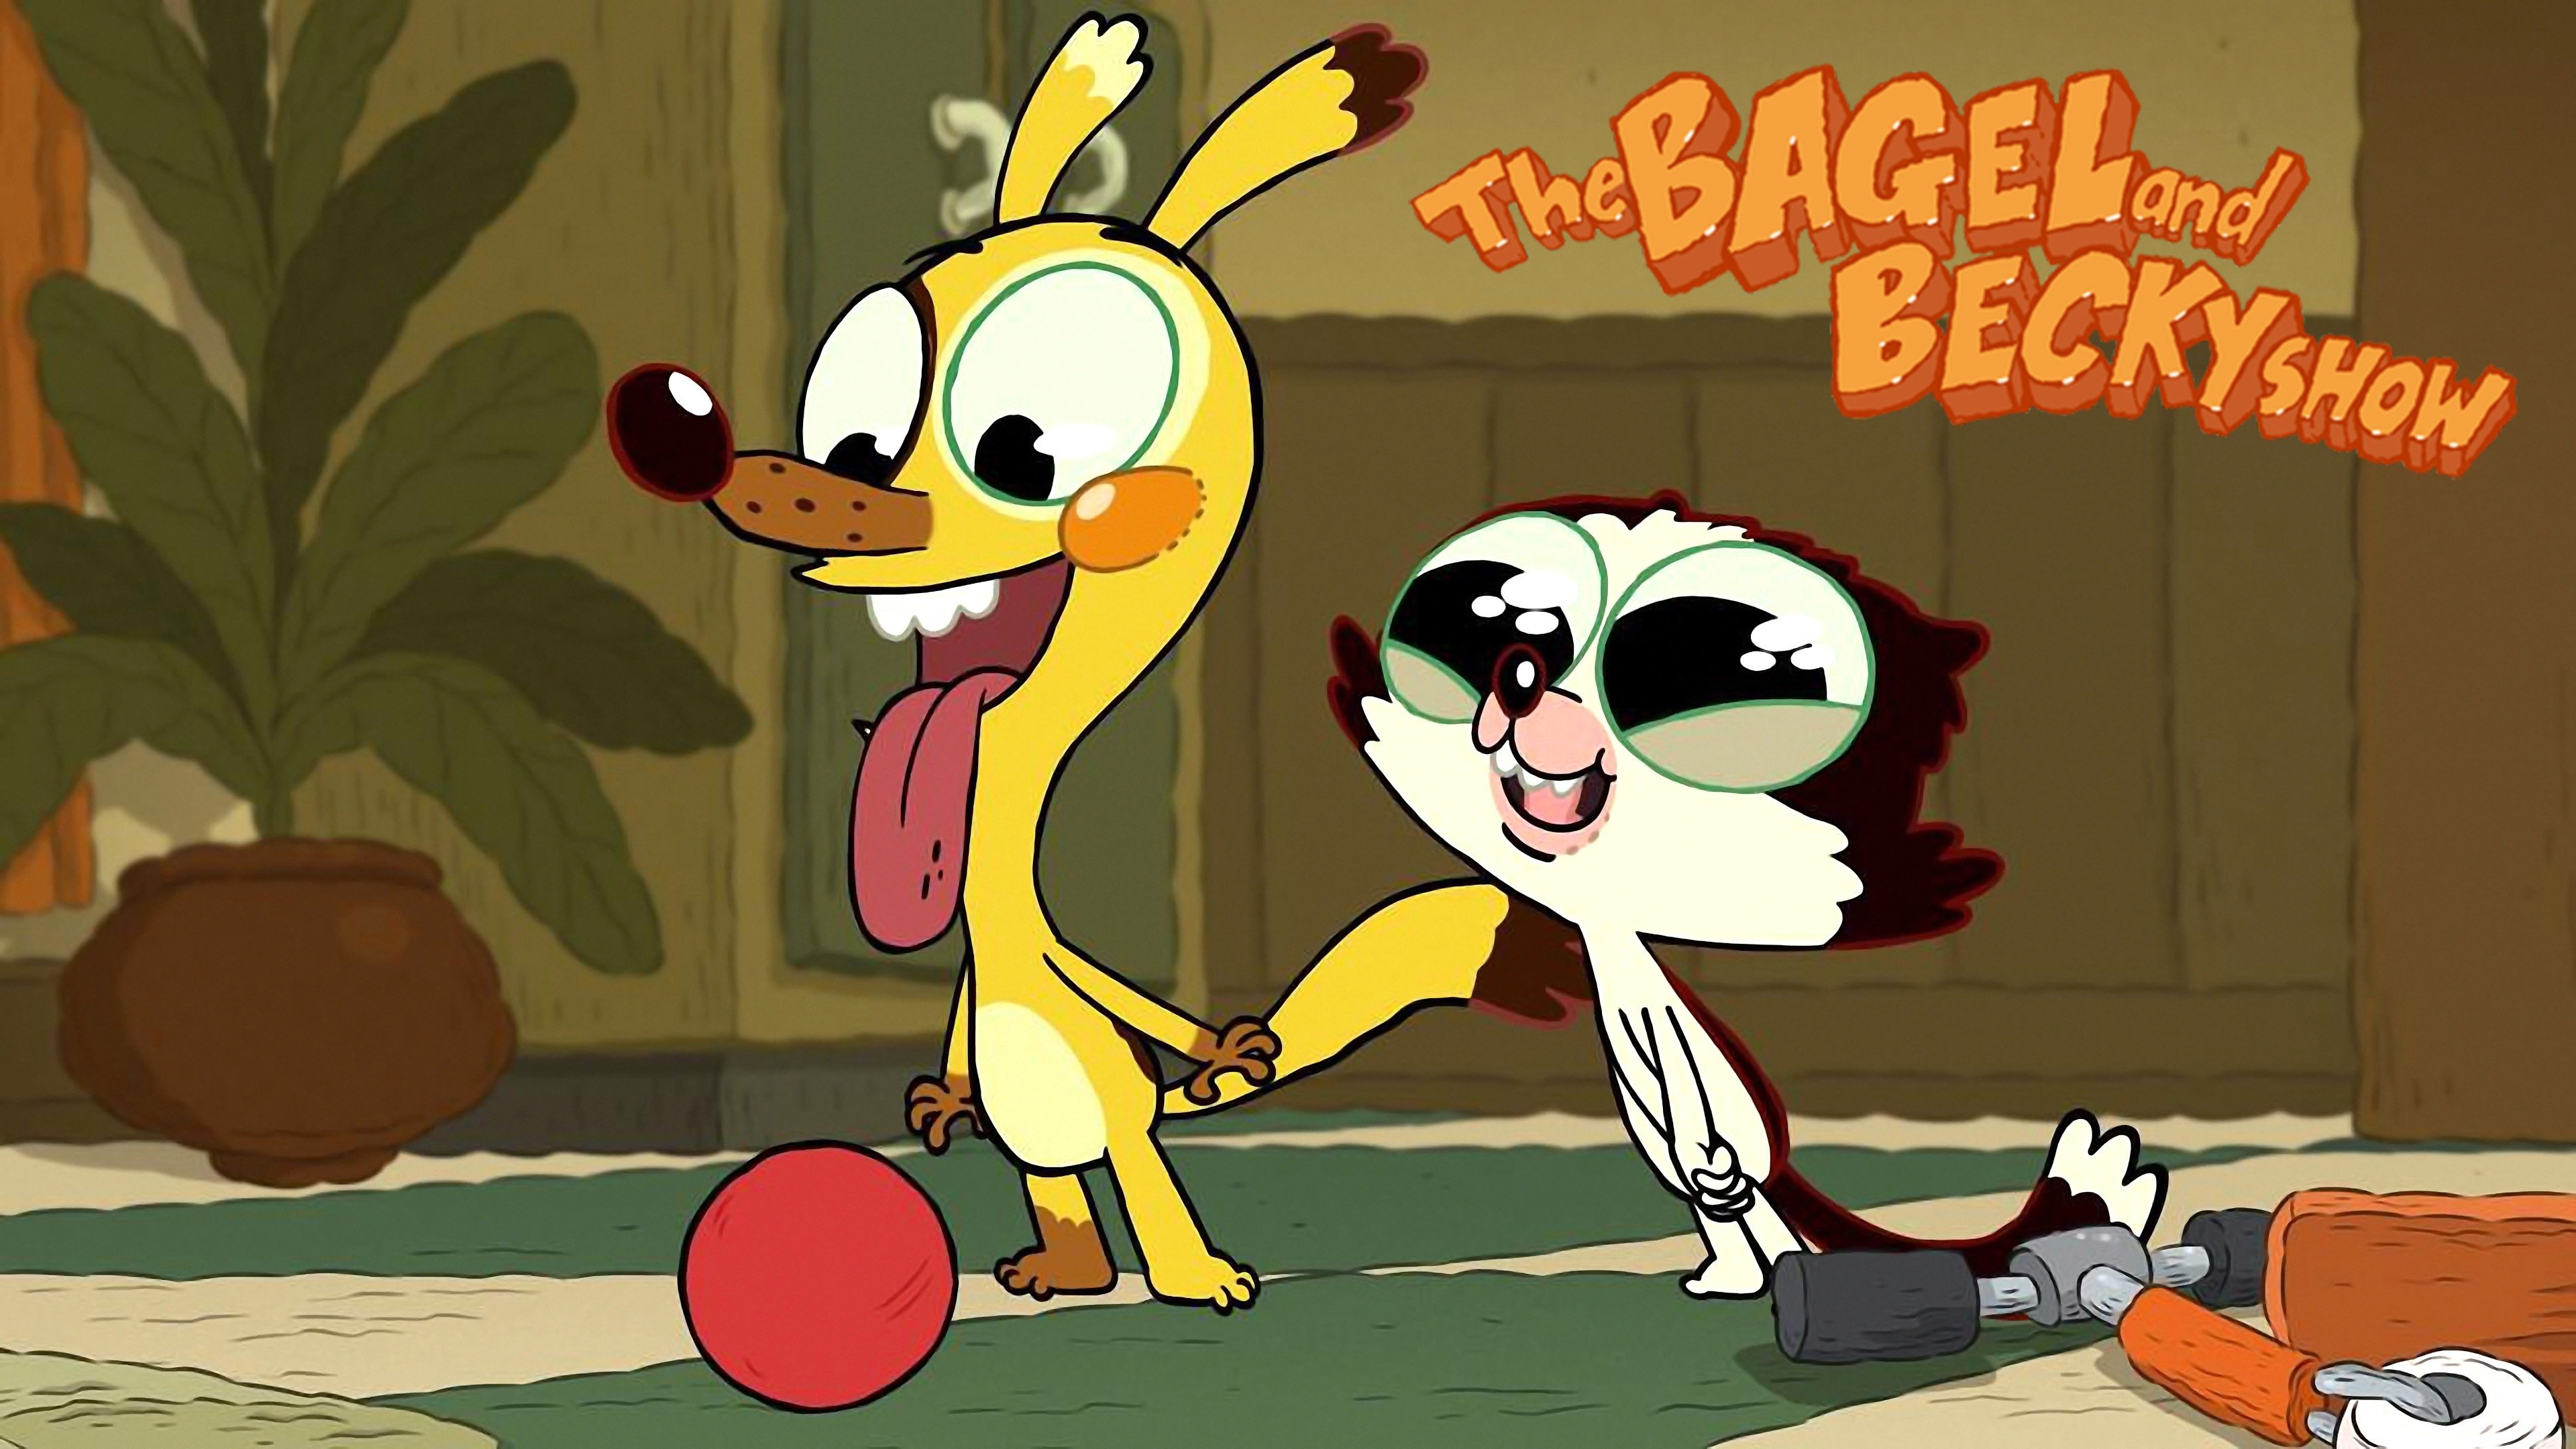 Bagel and becky